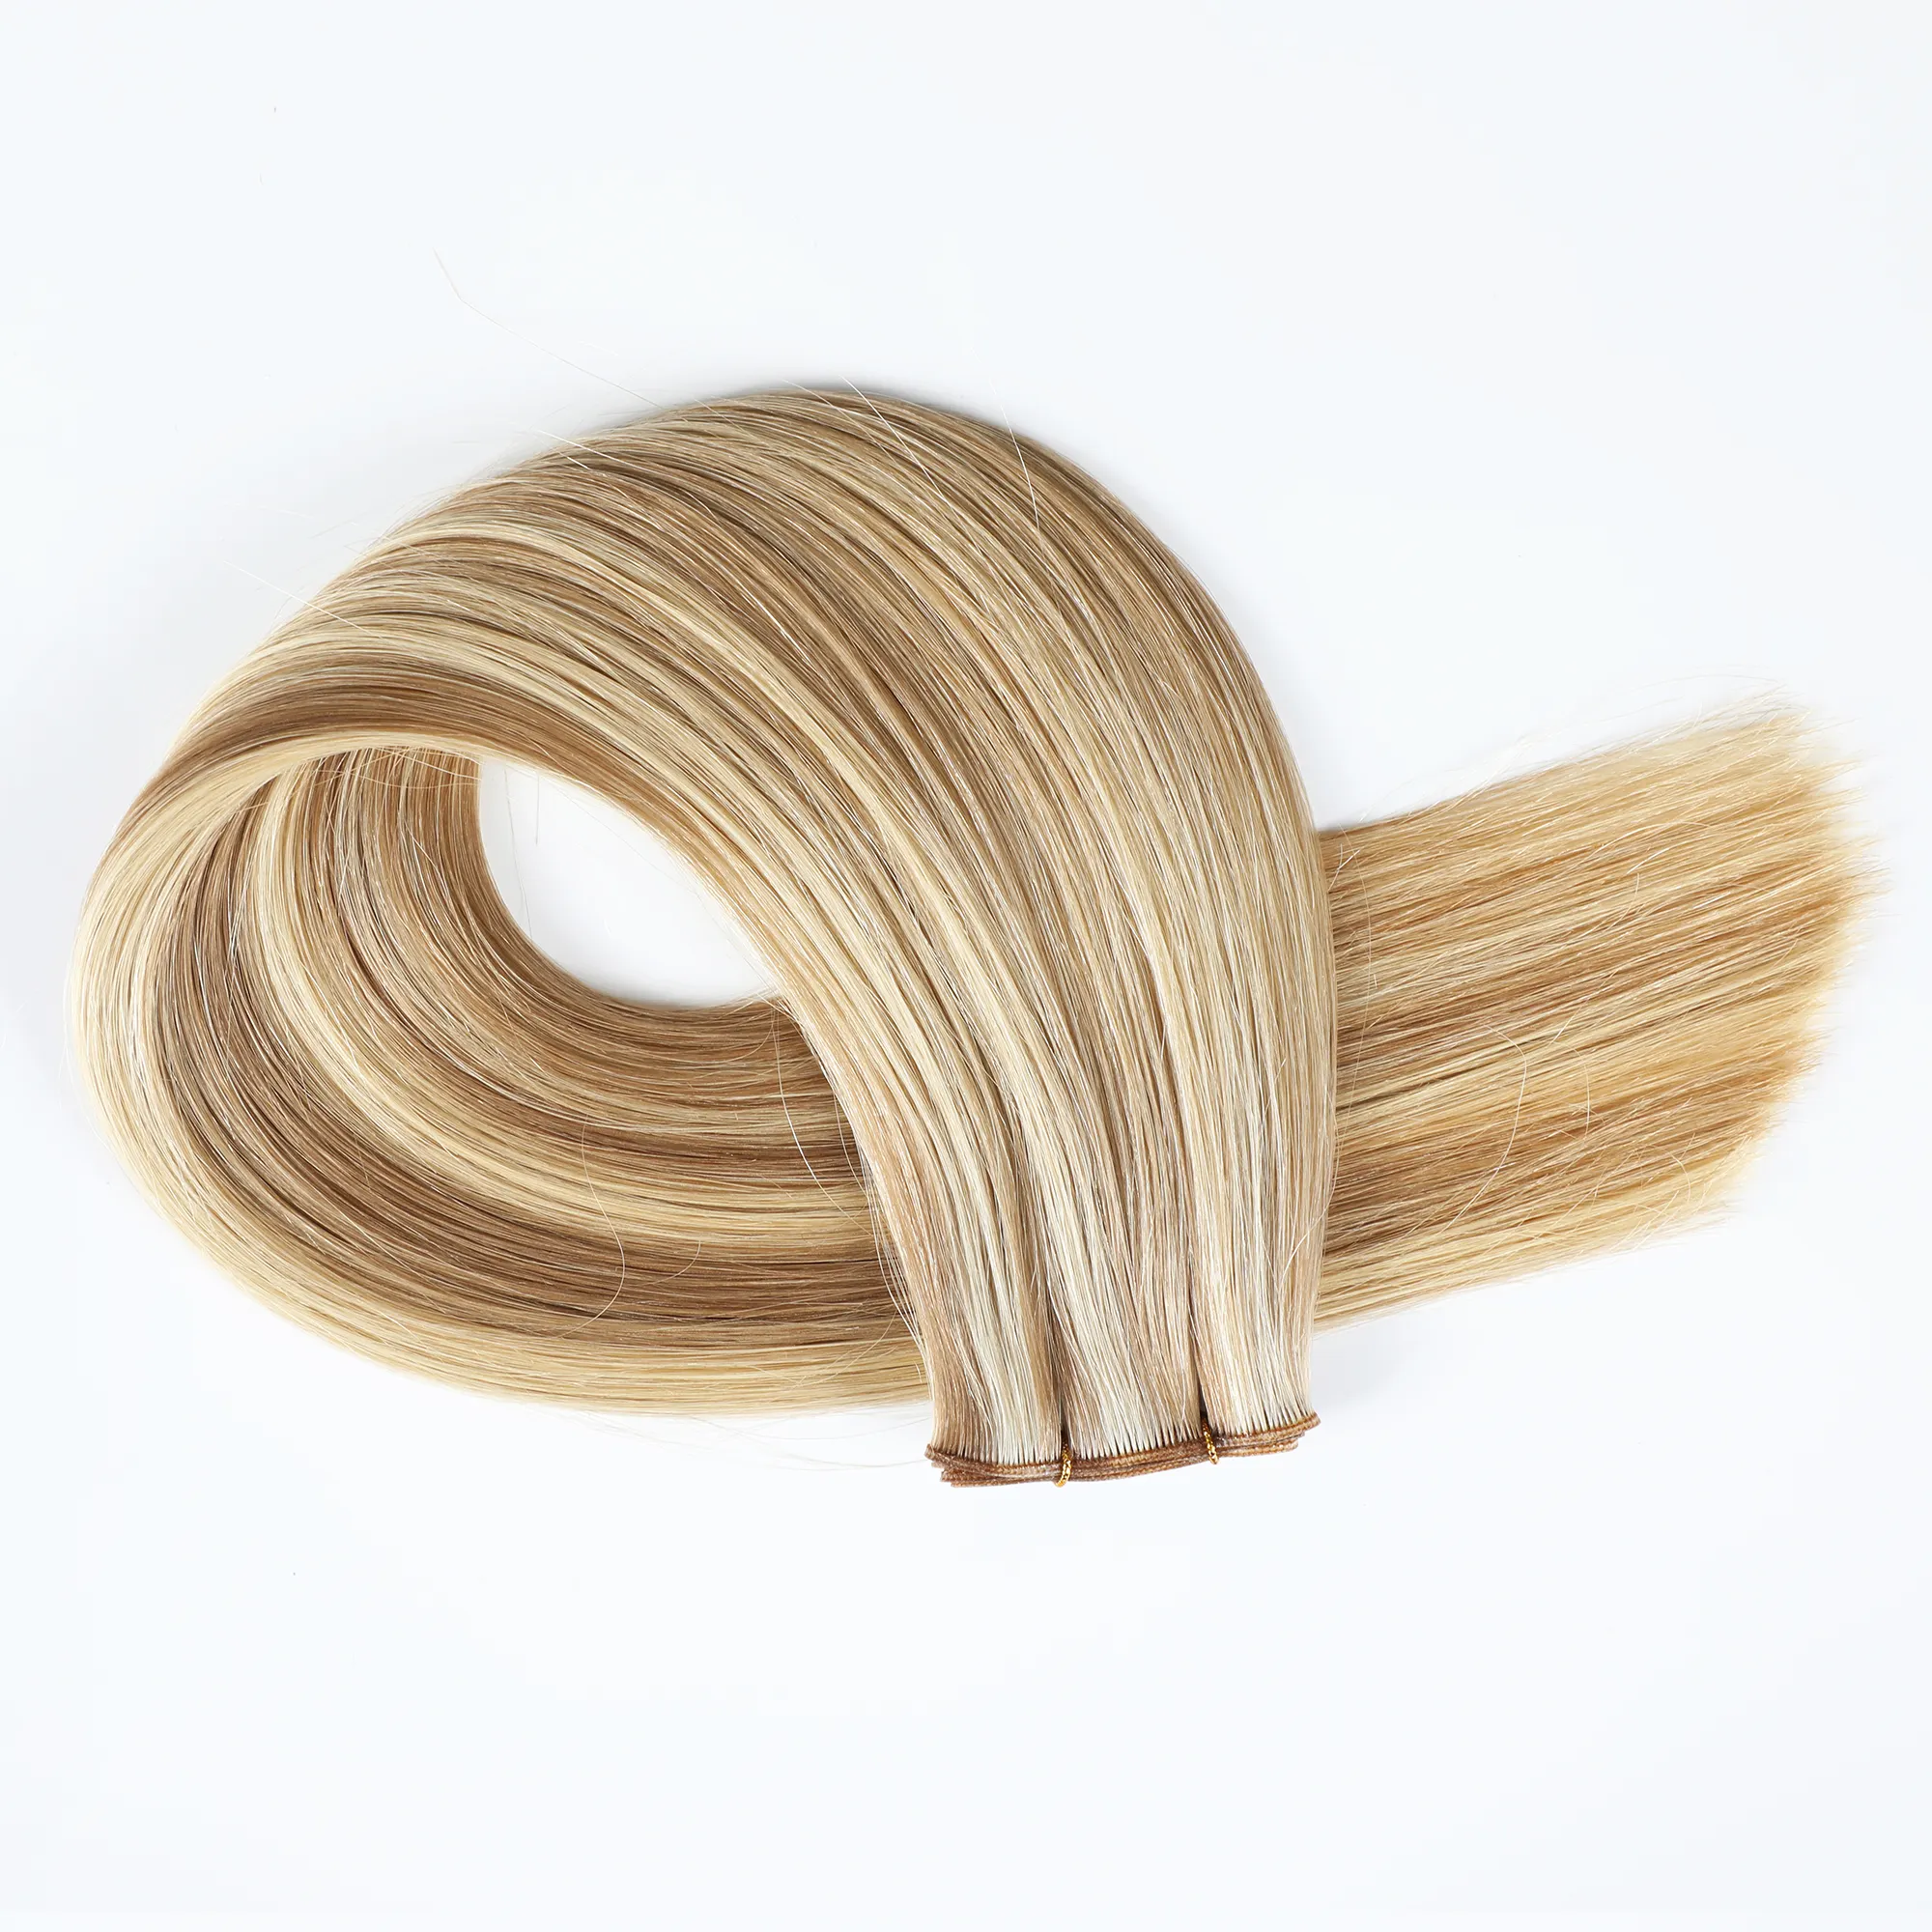 New invisible weft human hair extensions russian virgin remy hair genius weft